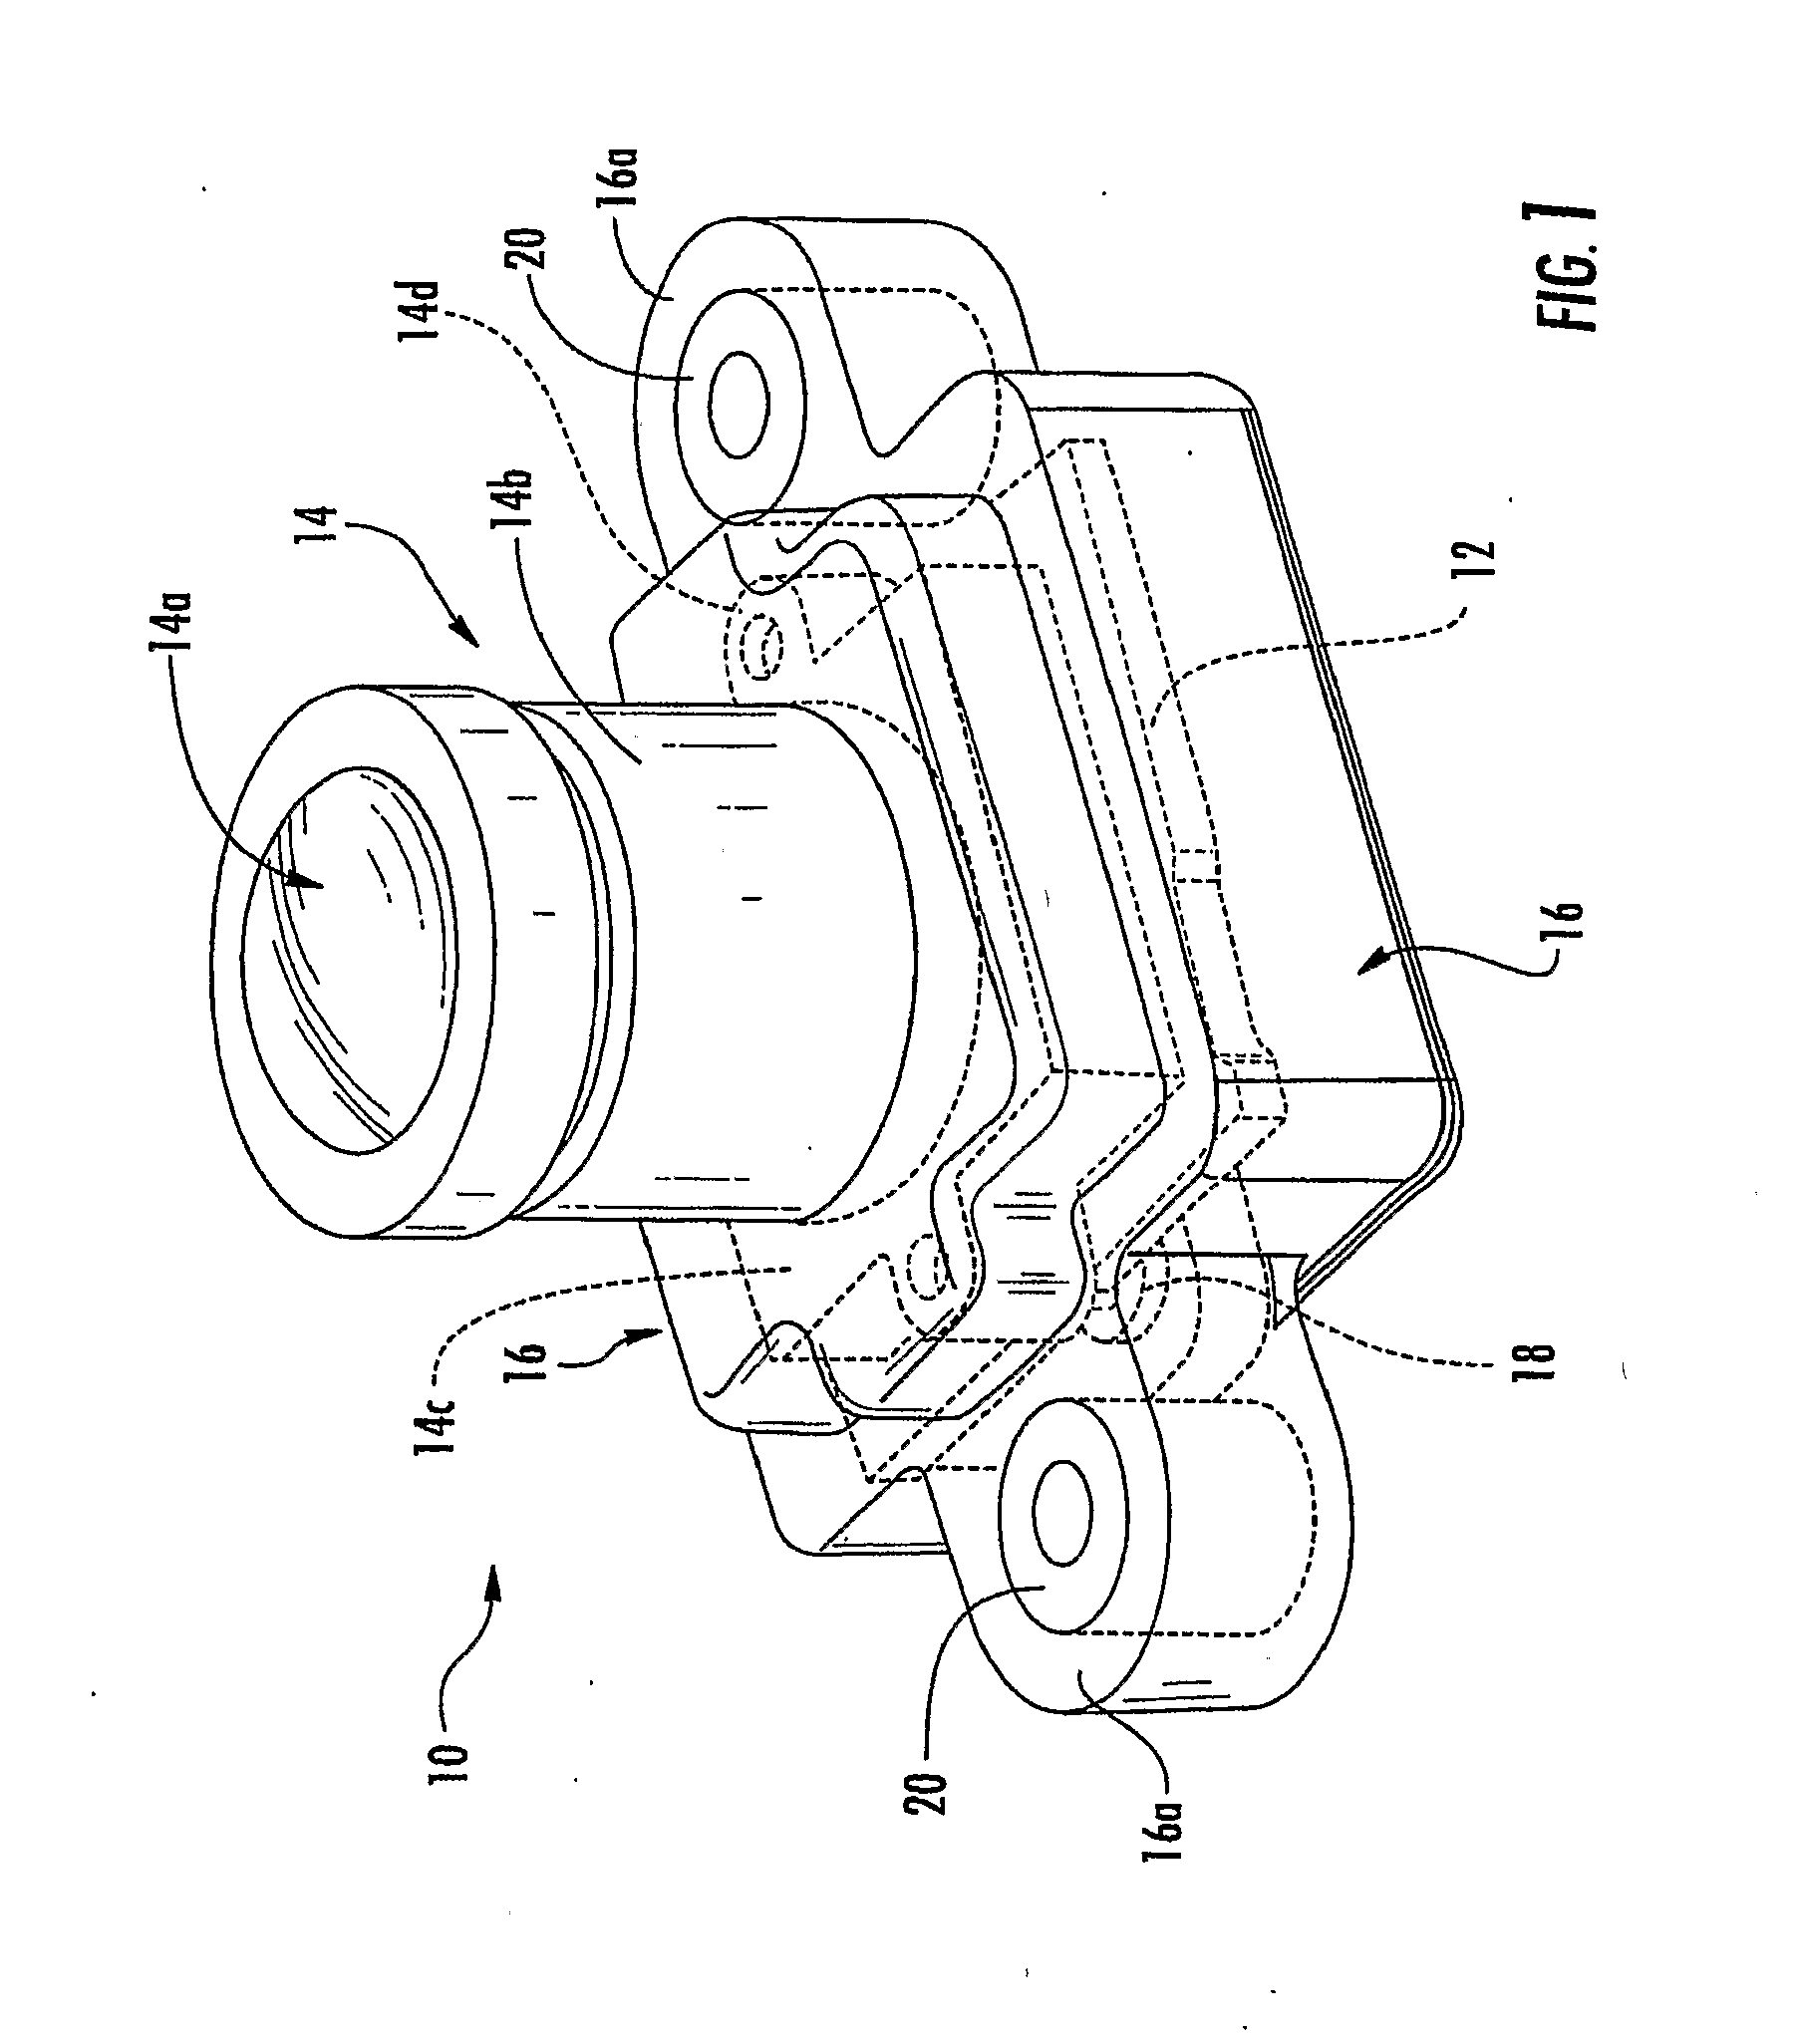 Camera module for vehicle vision system